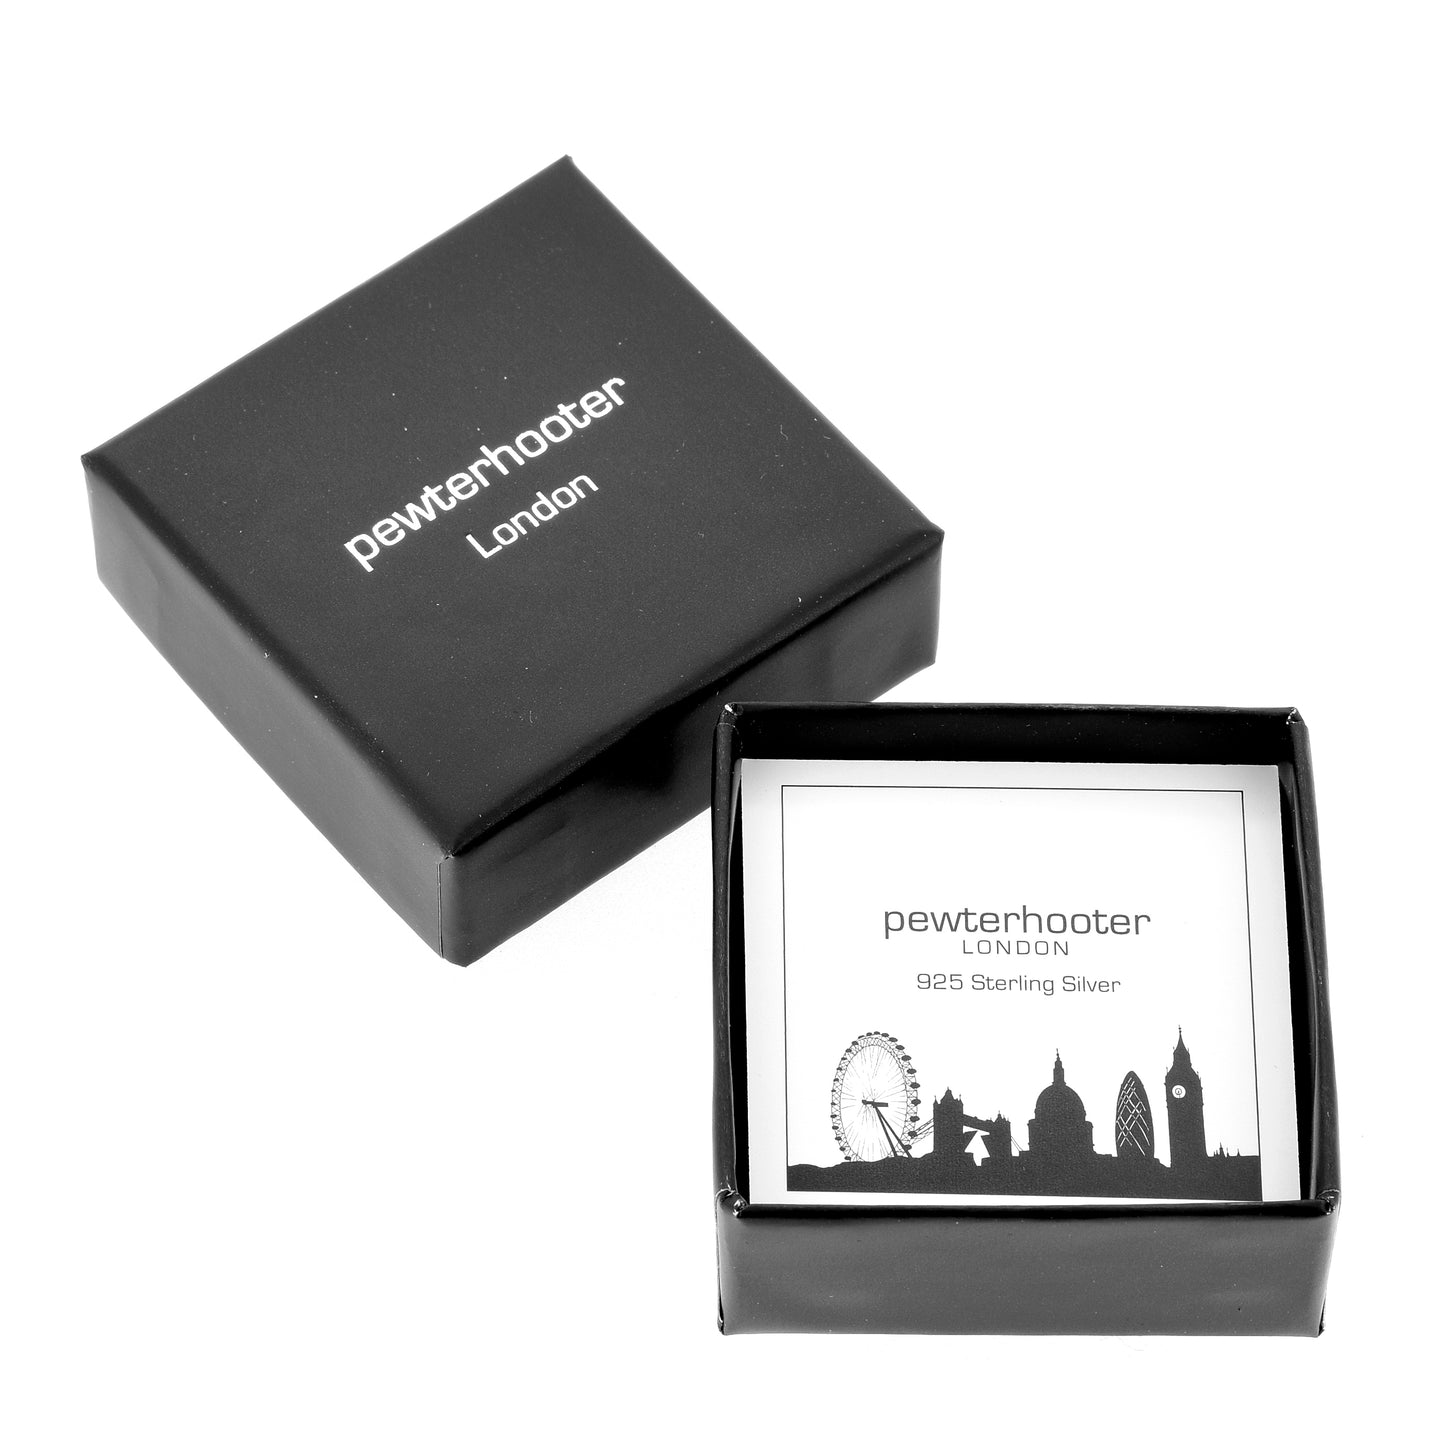 pewterhooter® Women's Classic Collection 925 Sterling silver earrings with sparkling Emerald Green channel crystals, packaged in a gift box for any occasion.